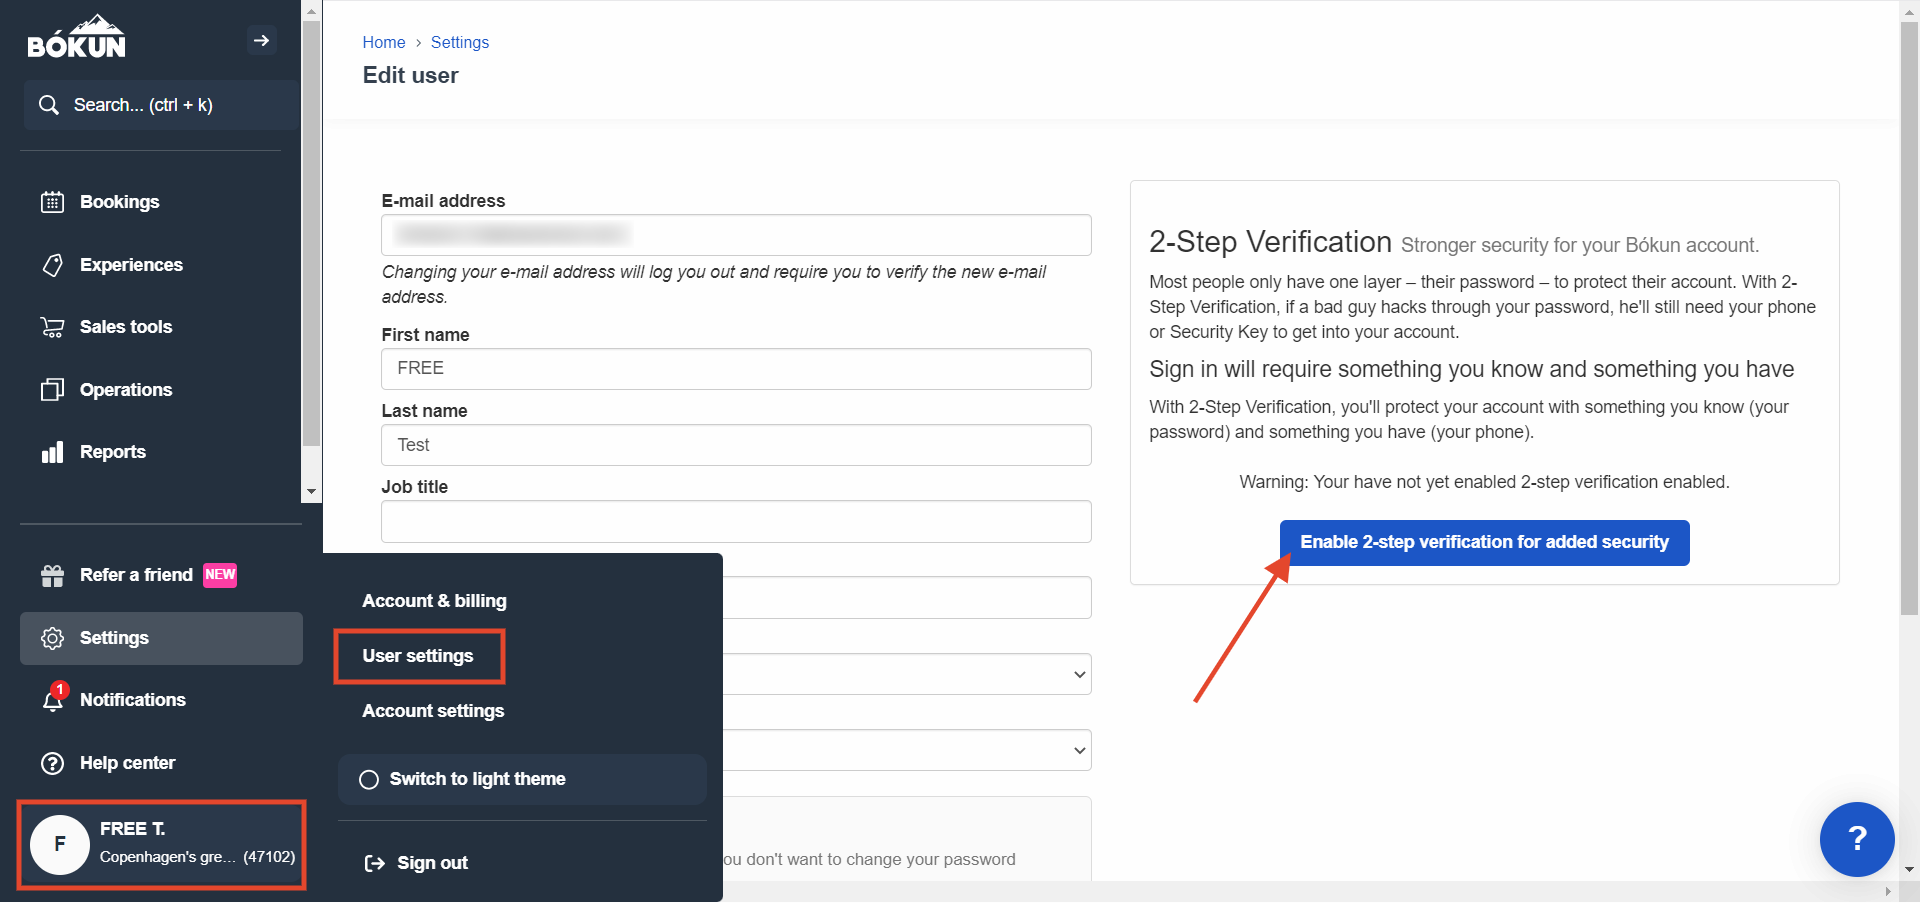 Bókuns edit user page with the enable 2-step verification button